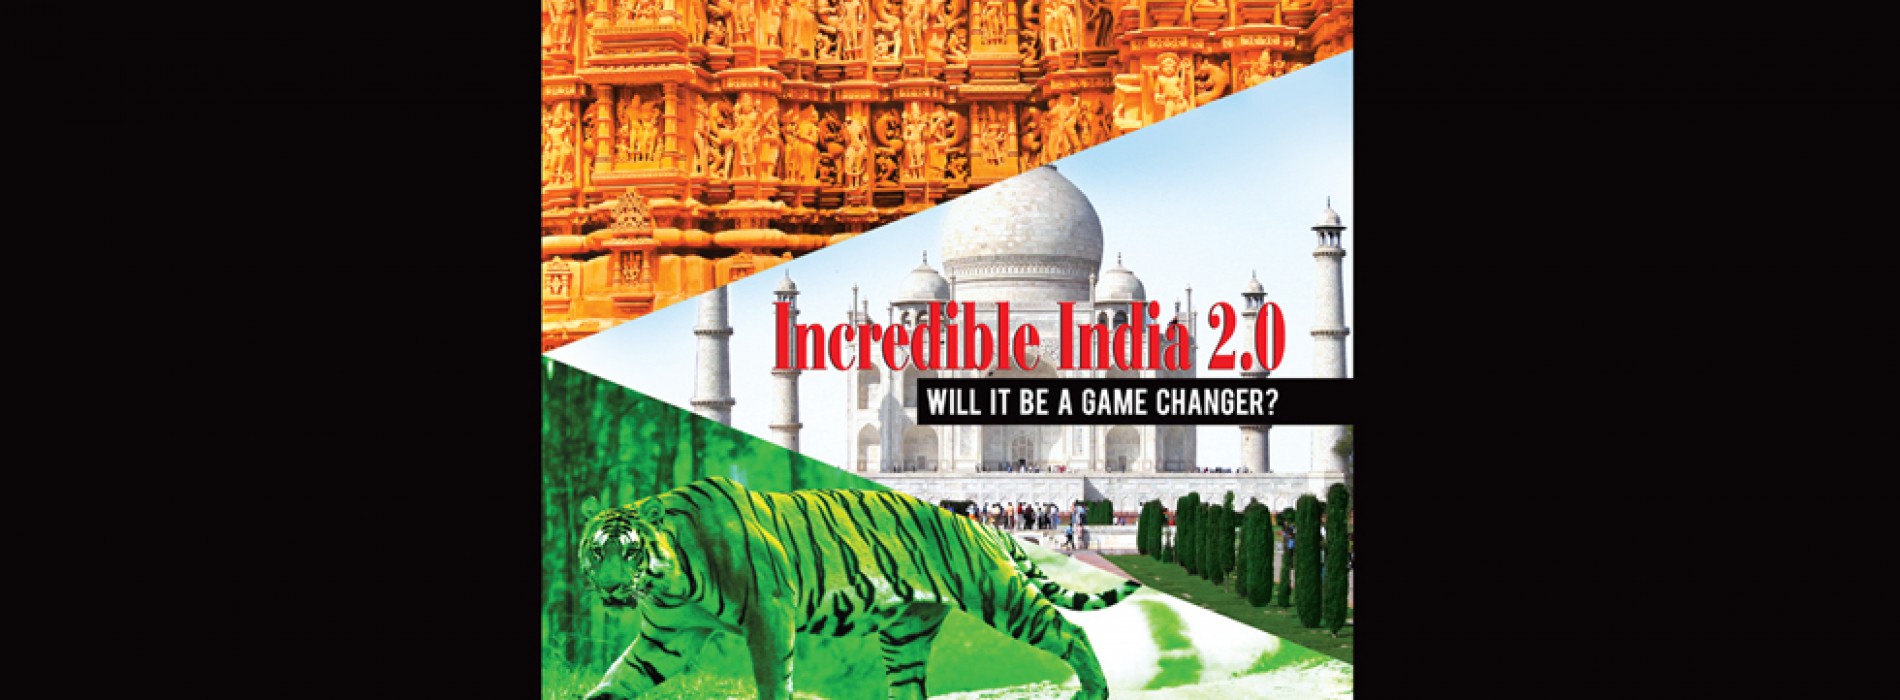 COVER STORY : Incredible India 2.0, will it be a game-changer?